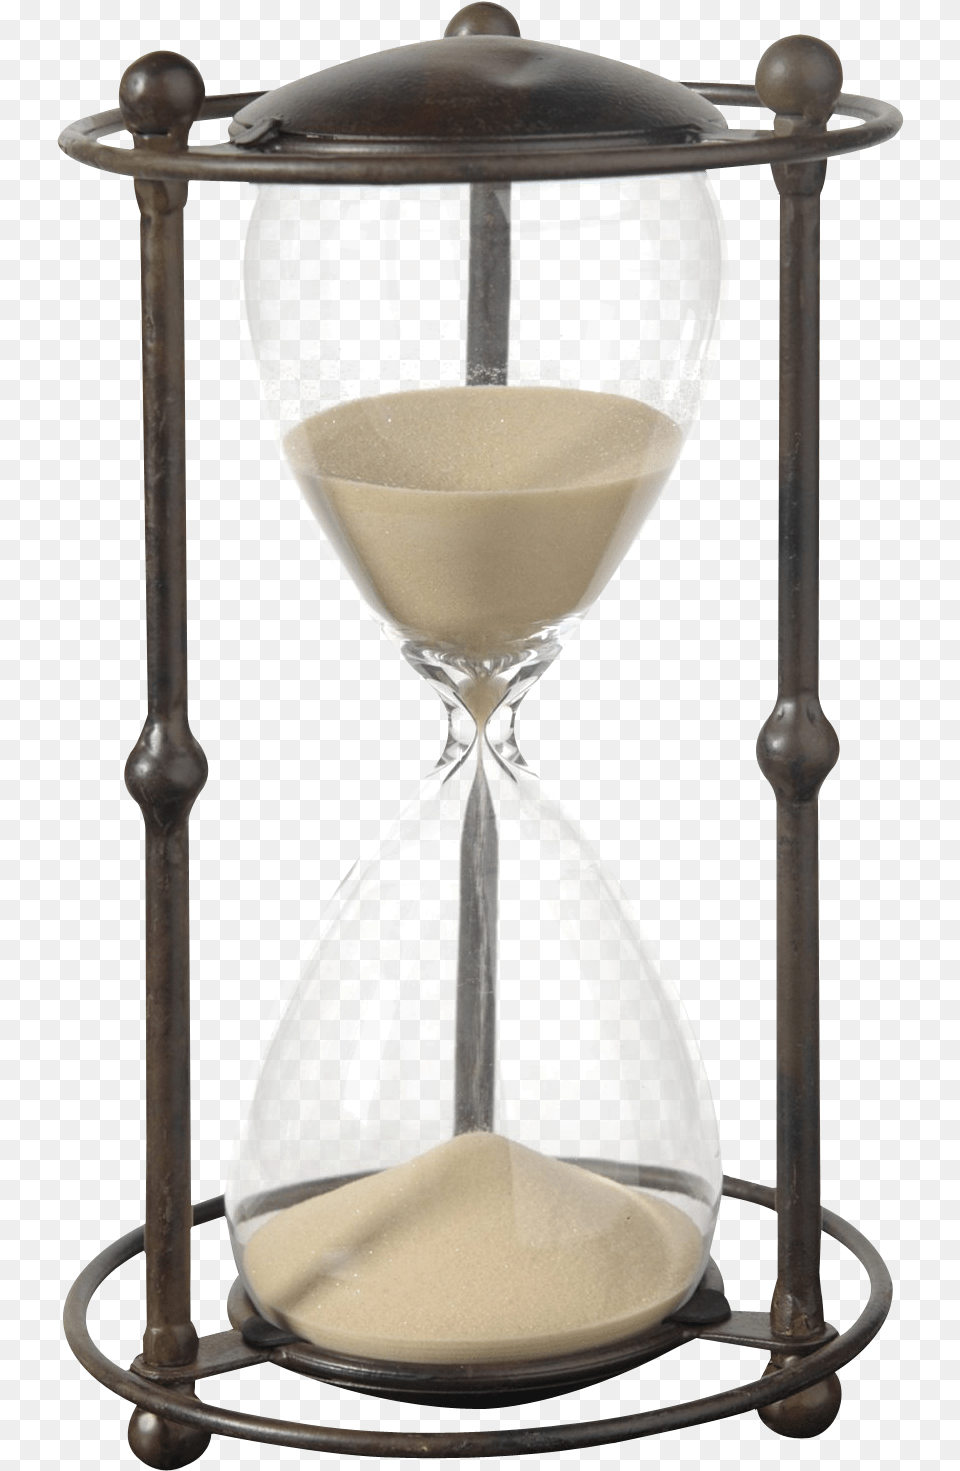 Pngpix Com Hourglass Image Of Sand Clock, Beverage, Milk, Mace Club, Weapon Free Png Download